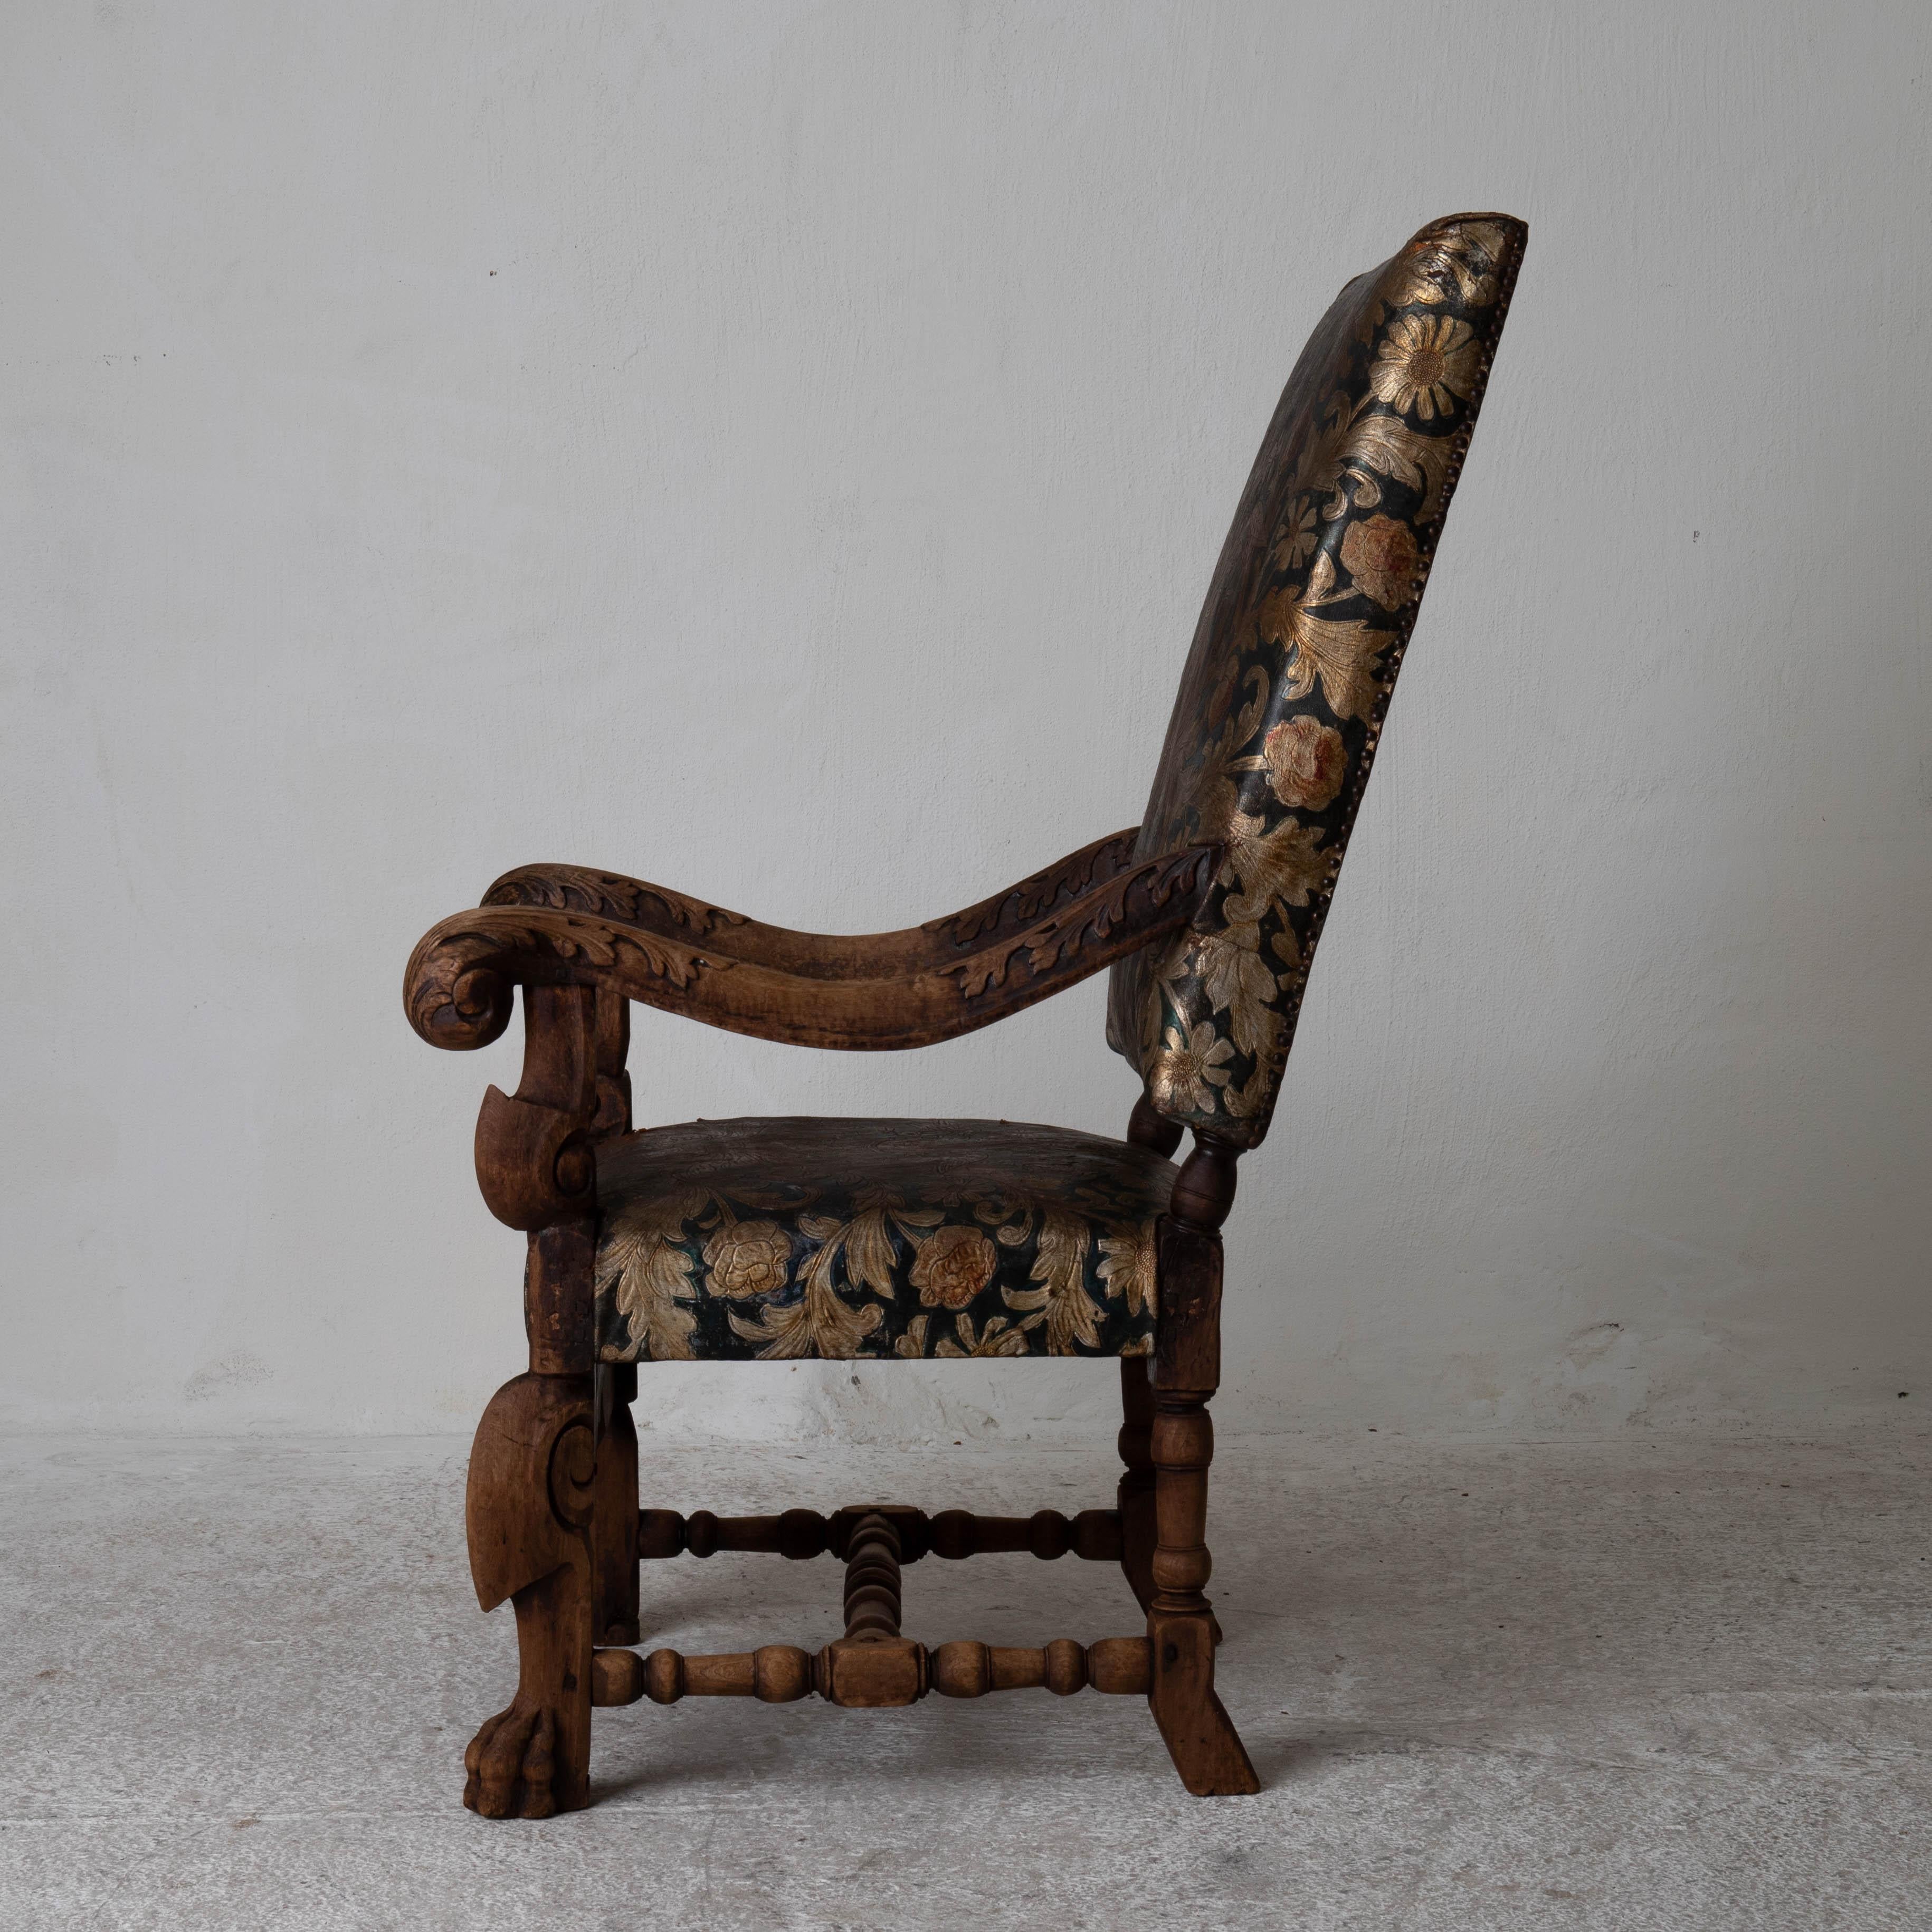 Armchair Swedish Early Baroque period gilt leather Sweden. An armchair in a generous size made during the Carolean Baroque Era 1650-1720 period in Sweden. Frame is oak wood in a raw finish decorated with lions feet and carved flowers. Upholstered in